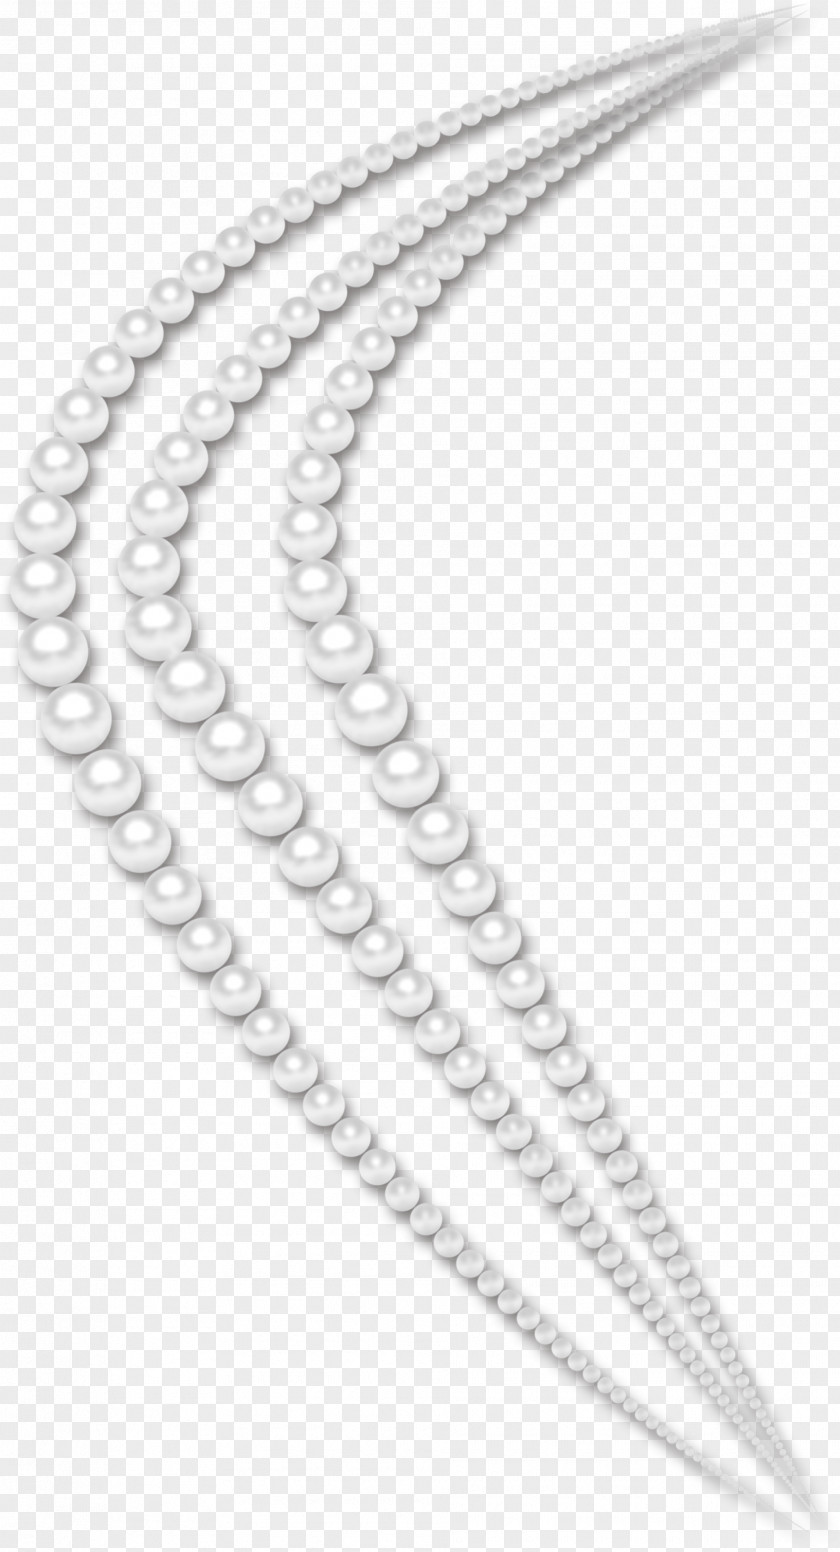 Necklace Pearl Parelketting Clip Art Digital Image PNG